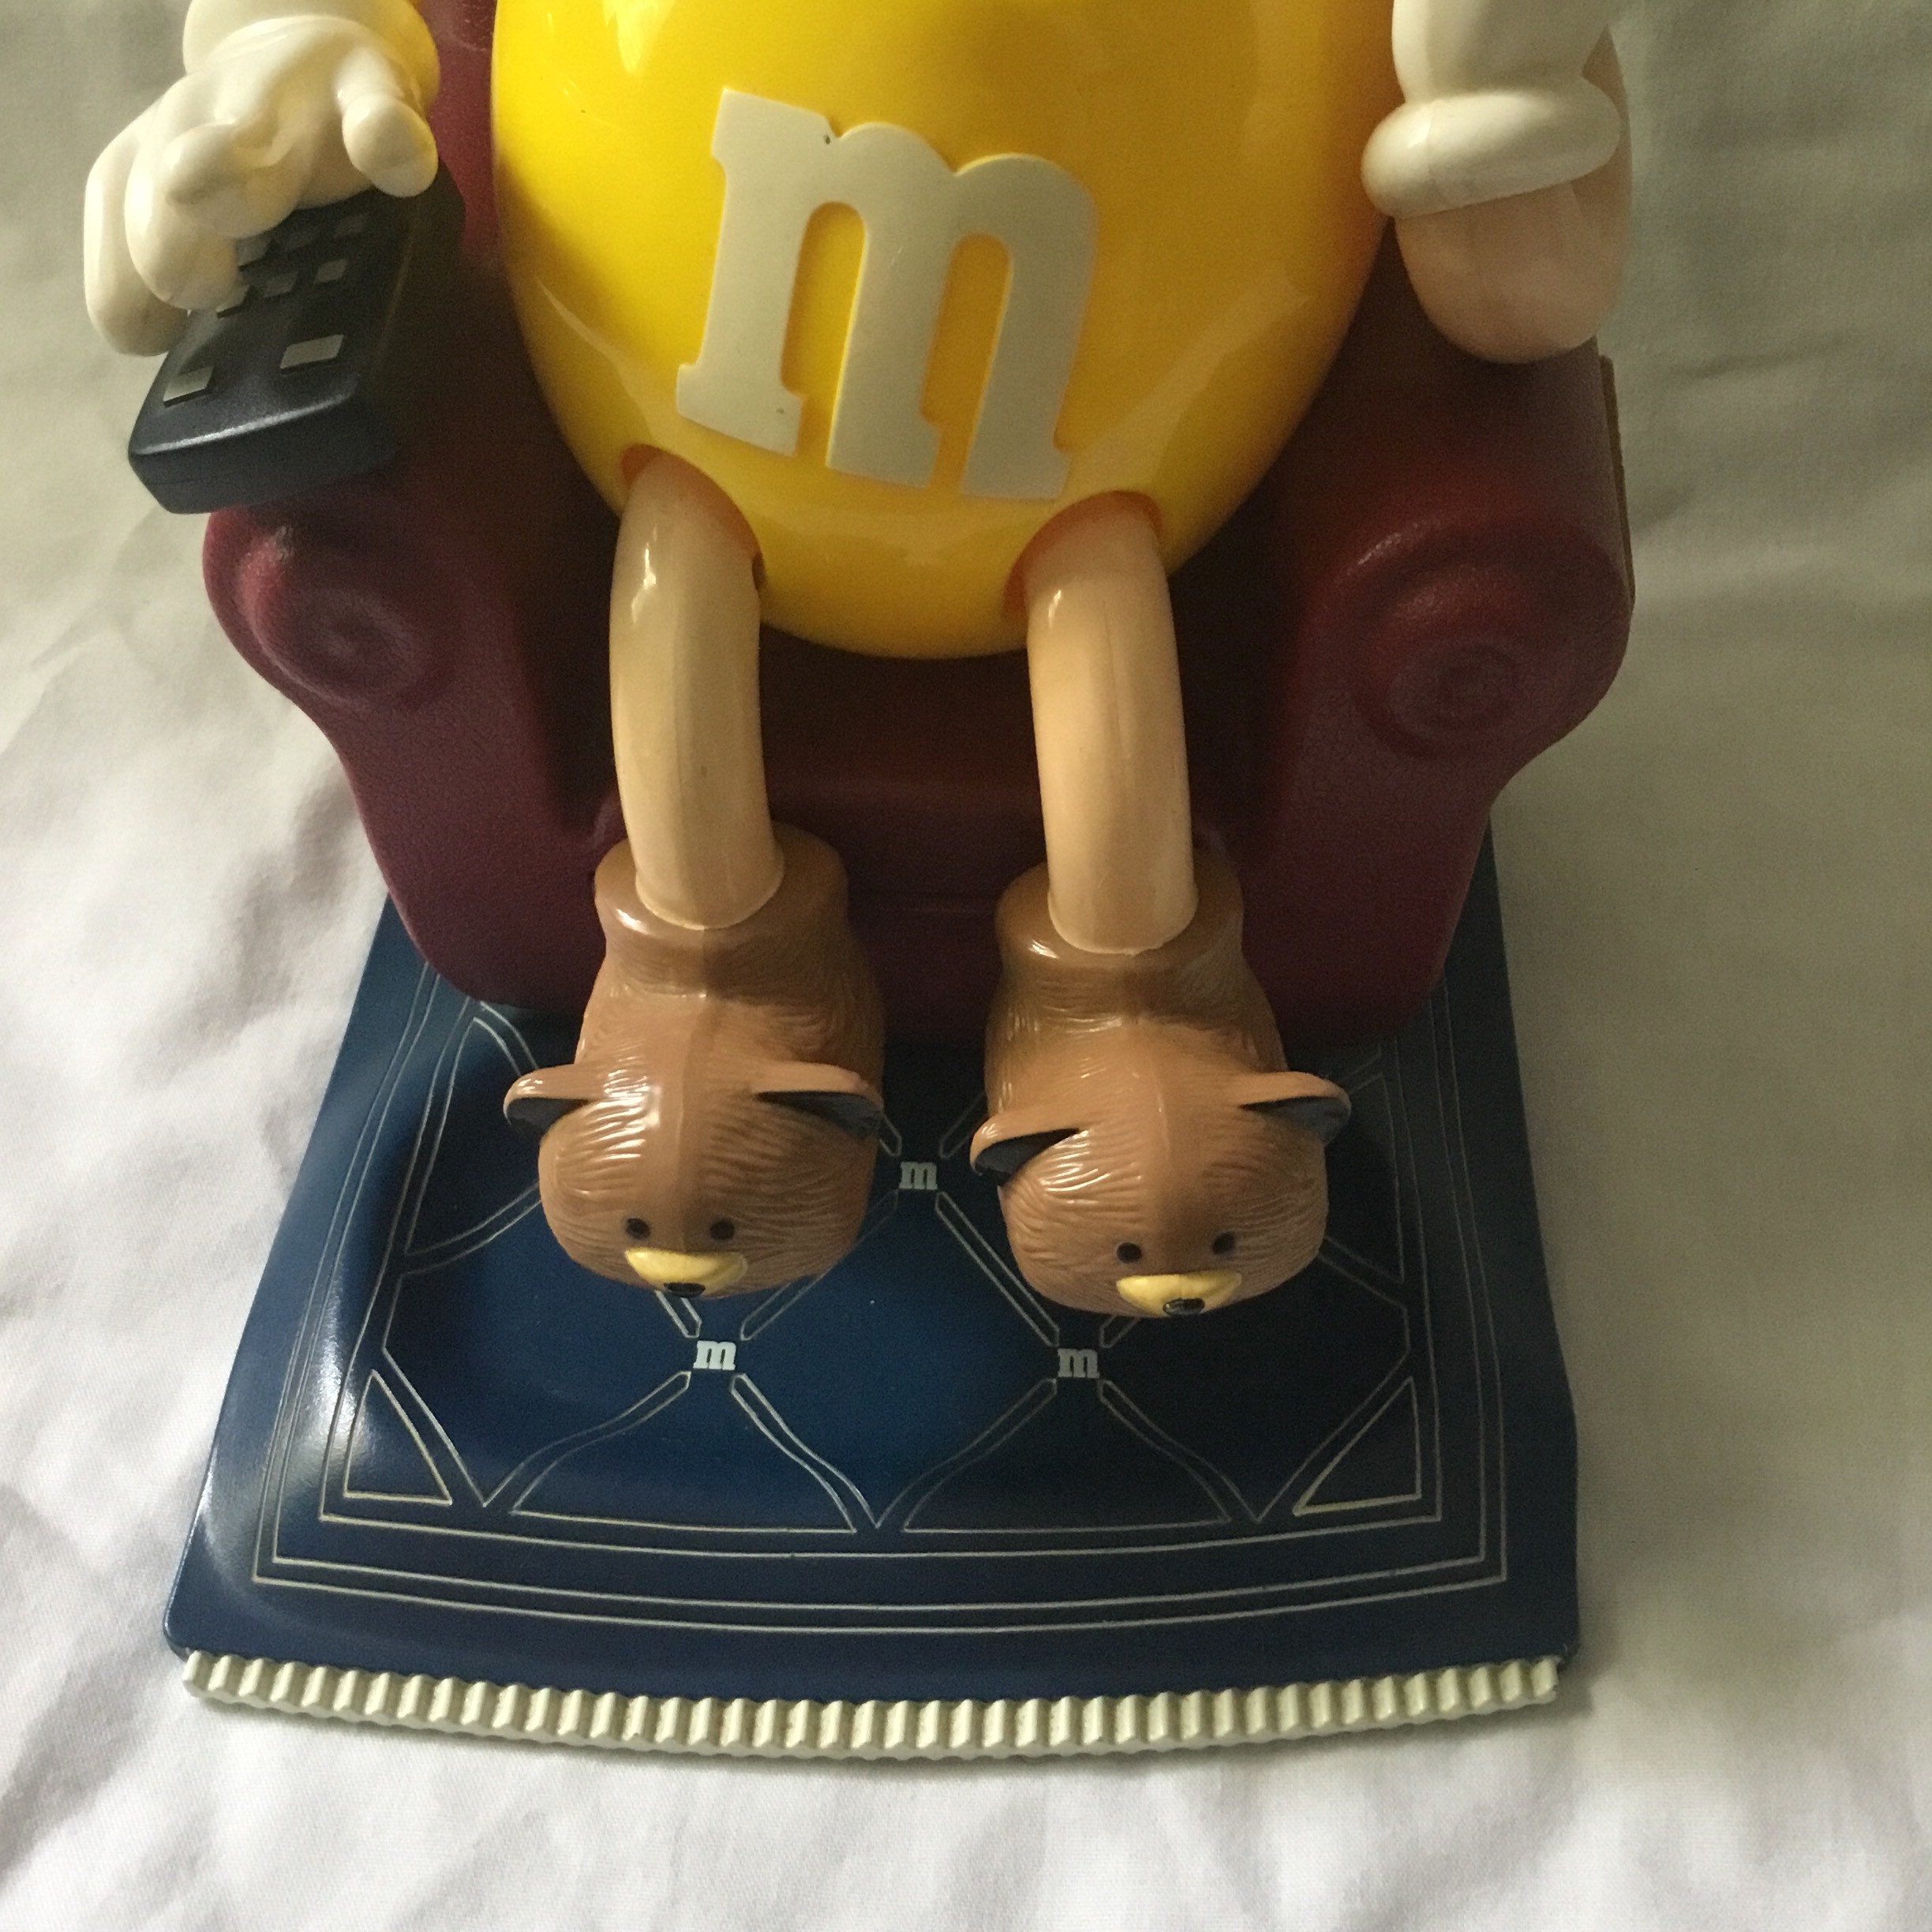 M&M Candy Dispenser - Yellow Peanut M&M Sitting in Recliner Chair